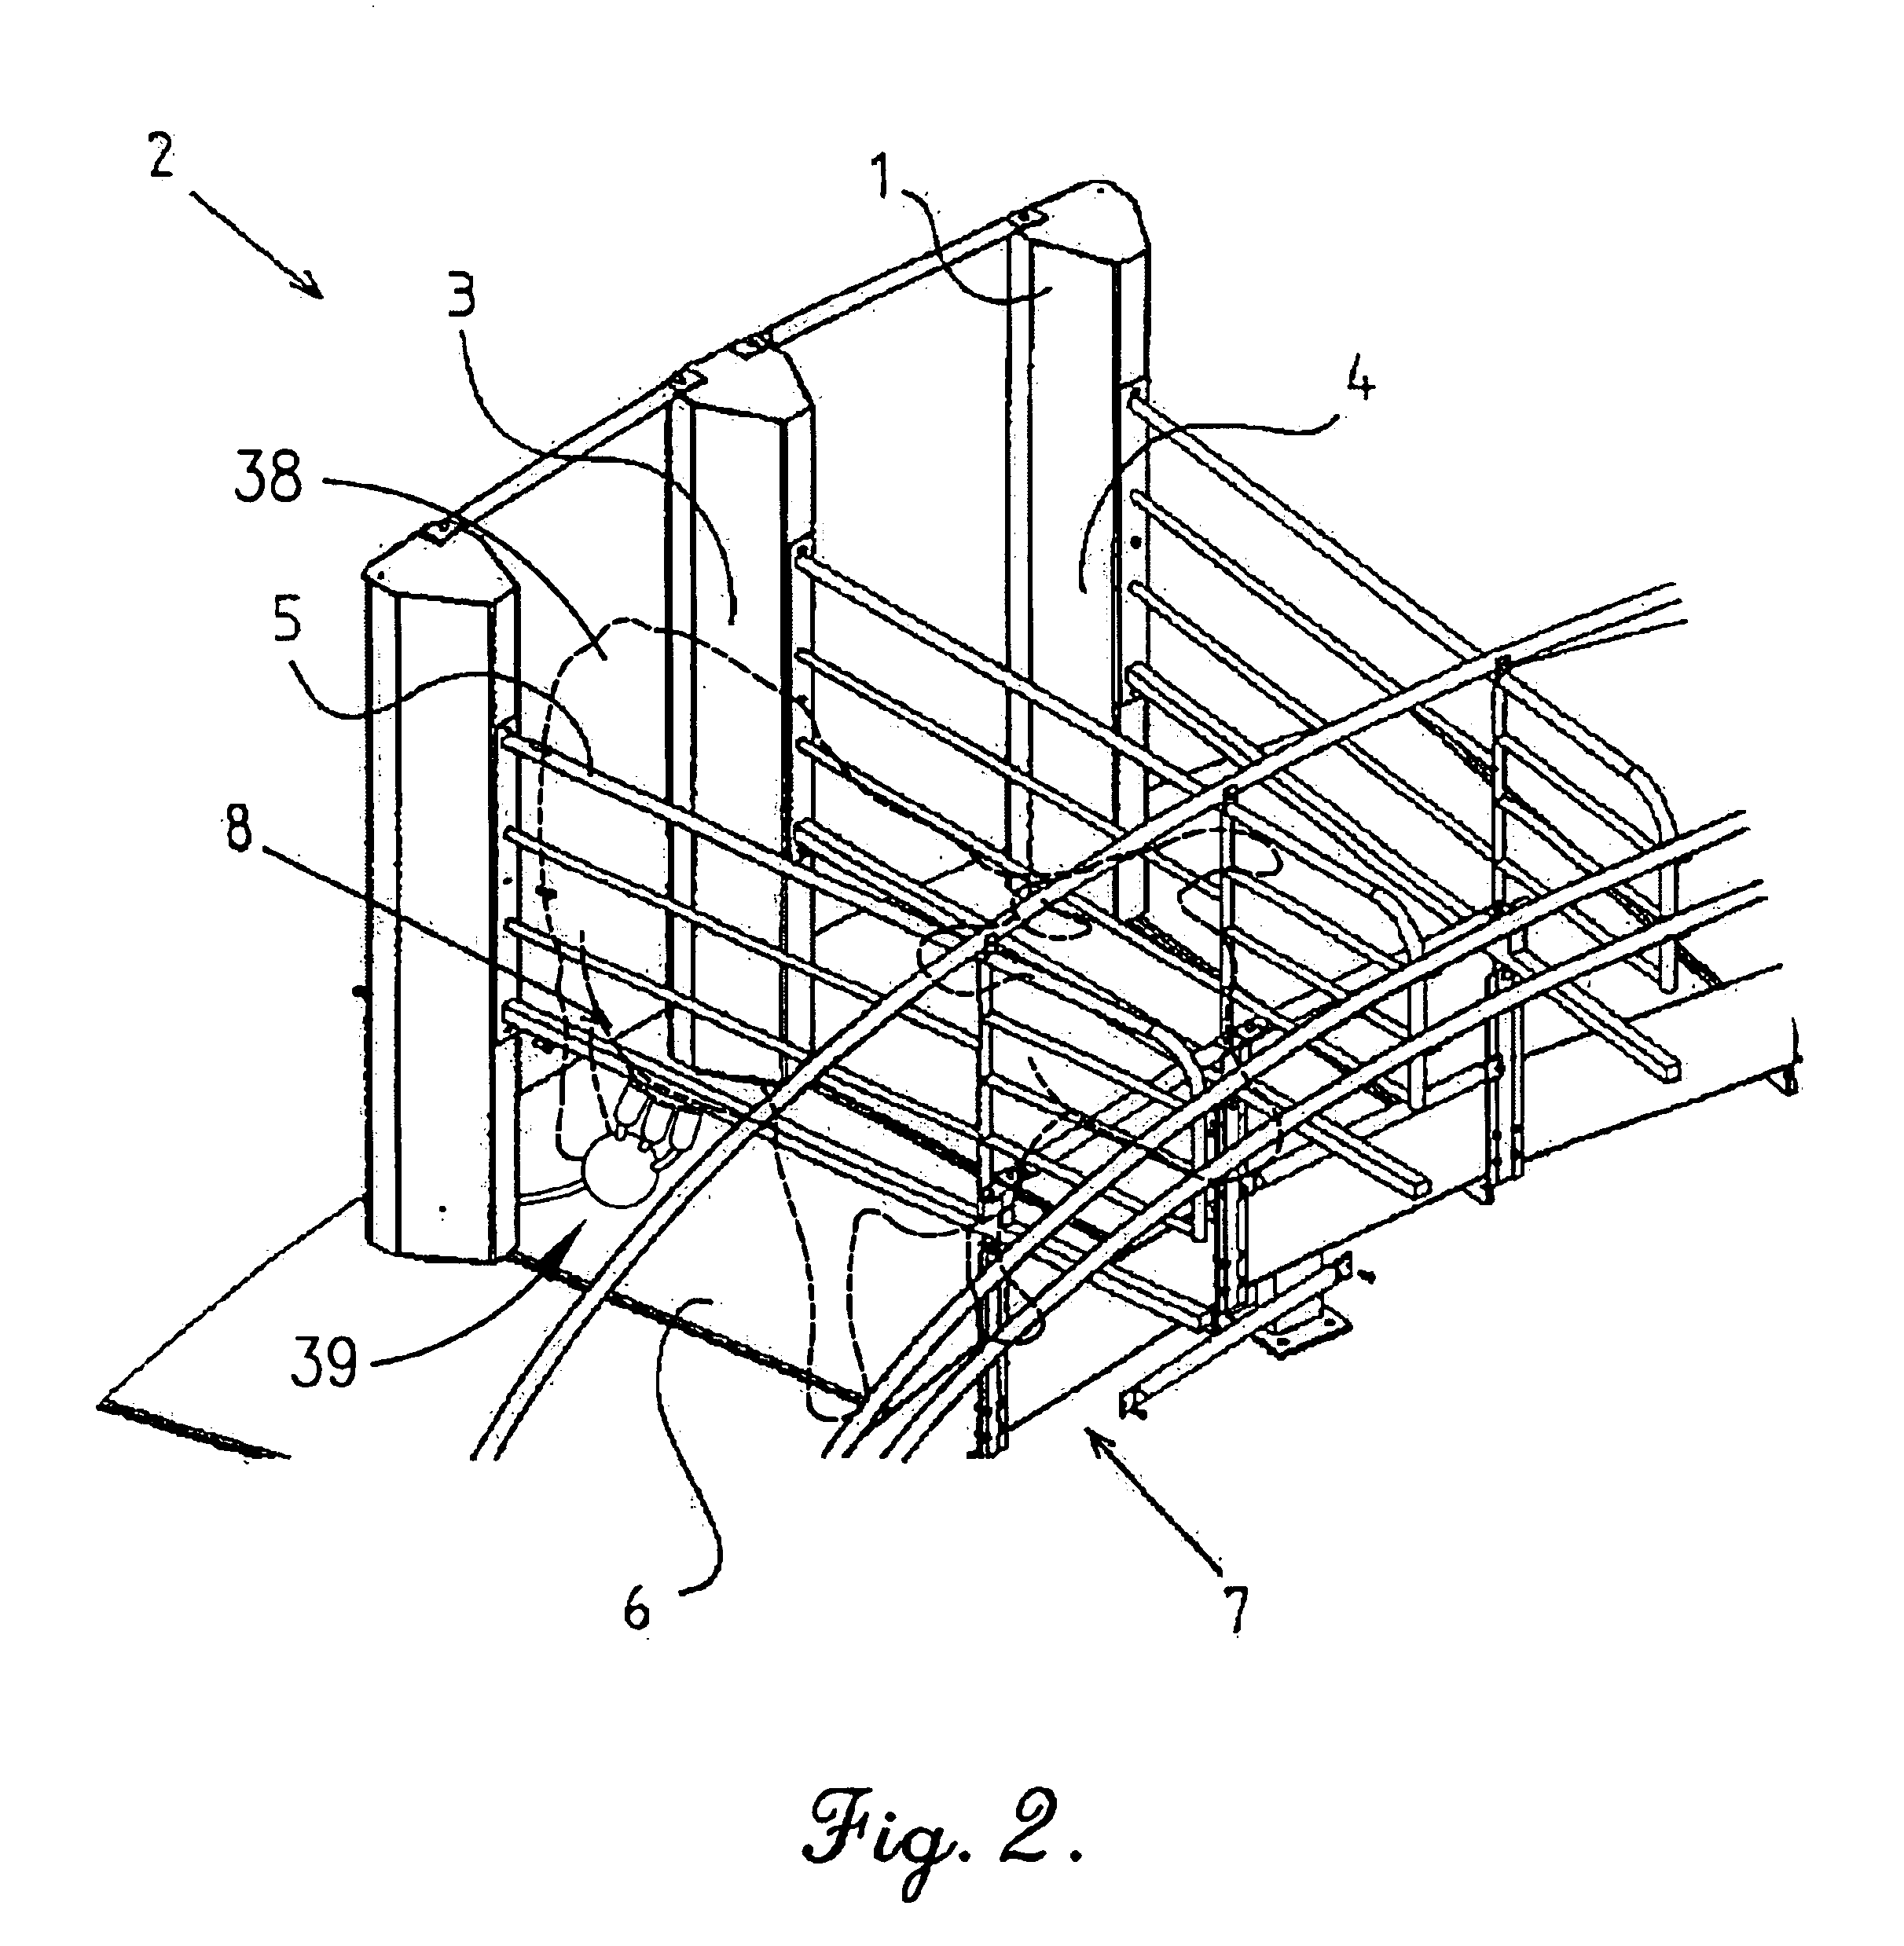 Device for at least one milking stall and a parlor comprising a plurality of milking stalls